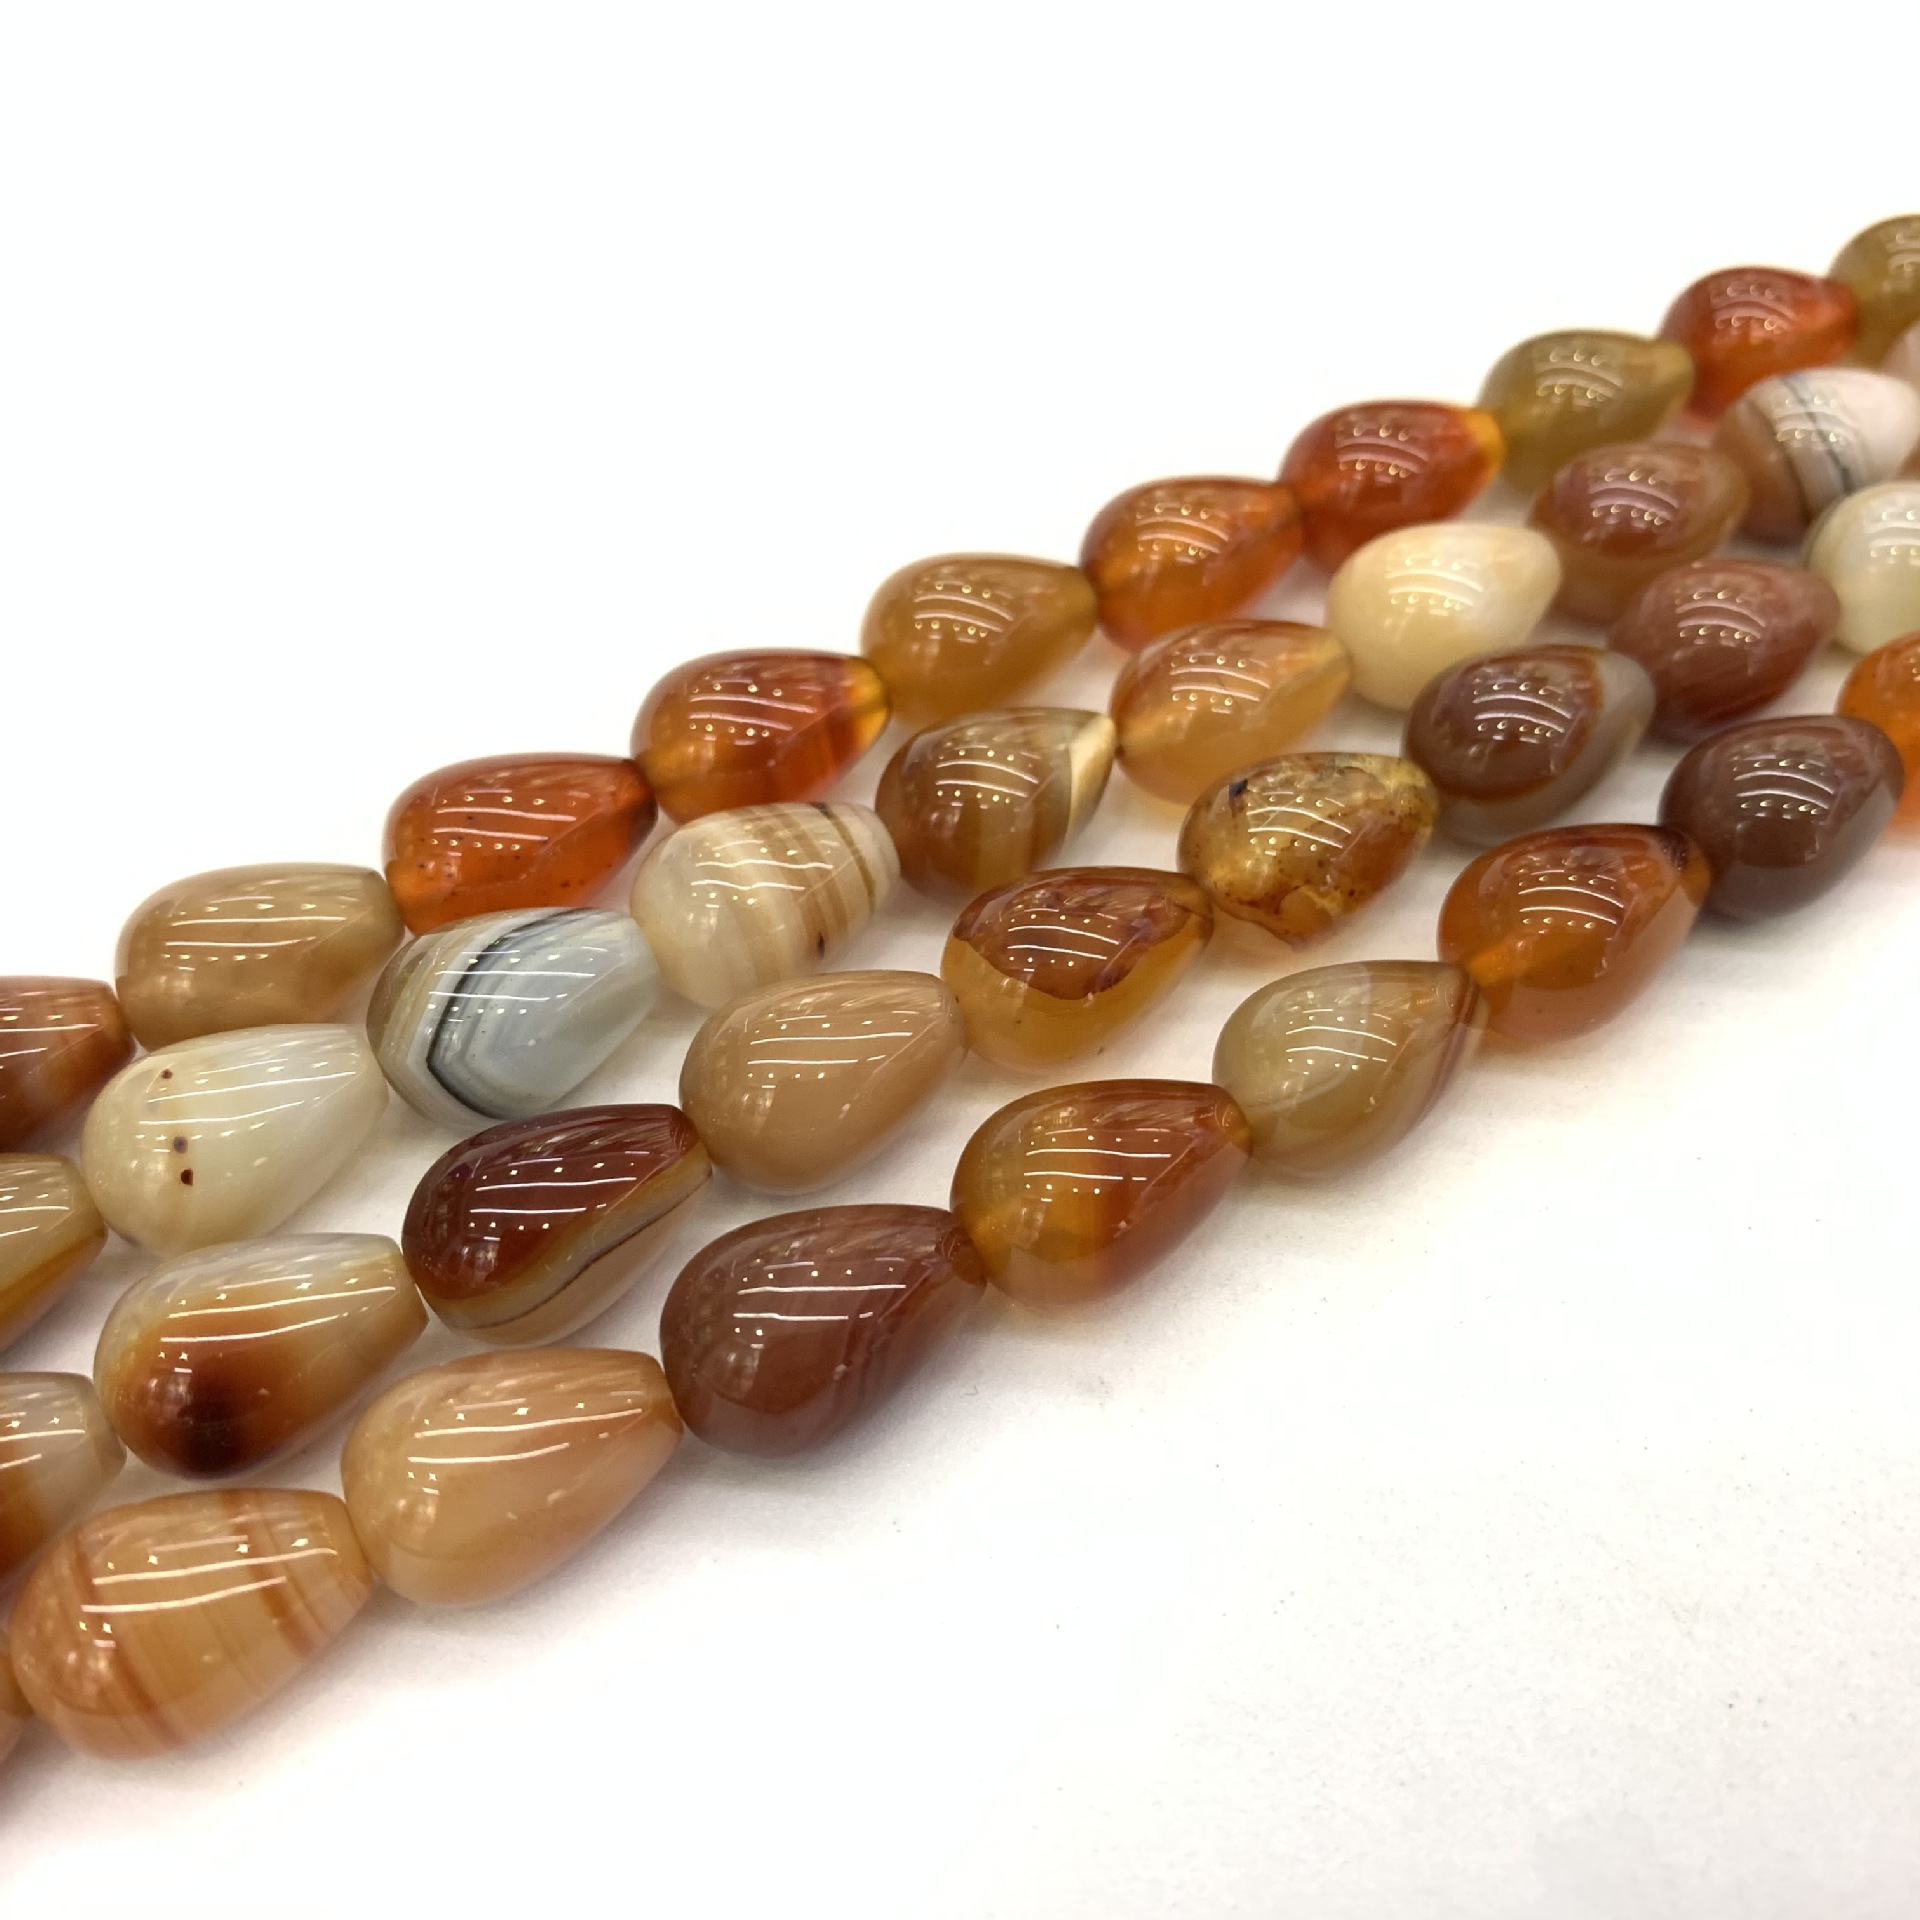 red line agate